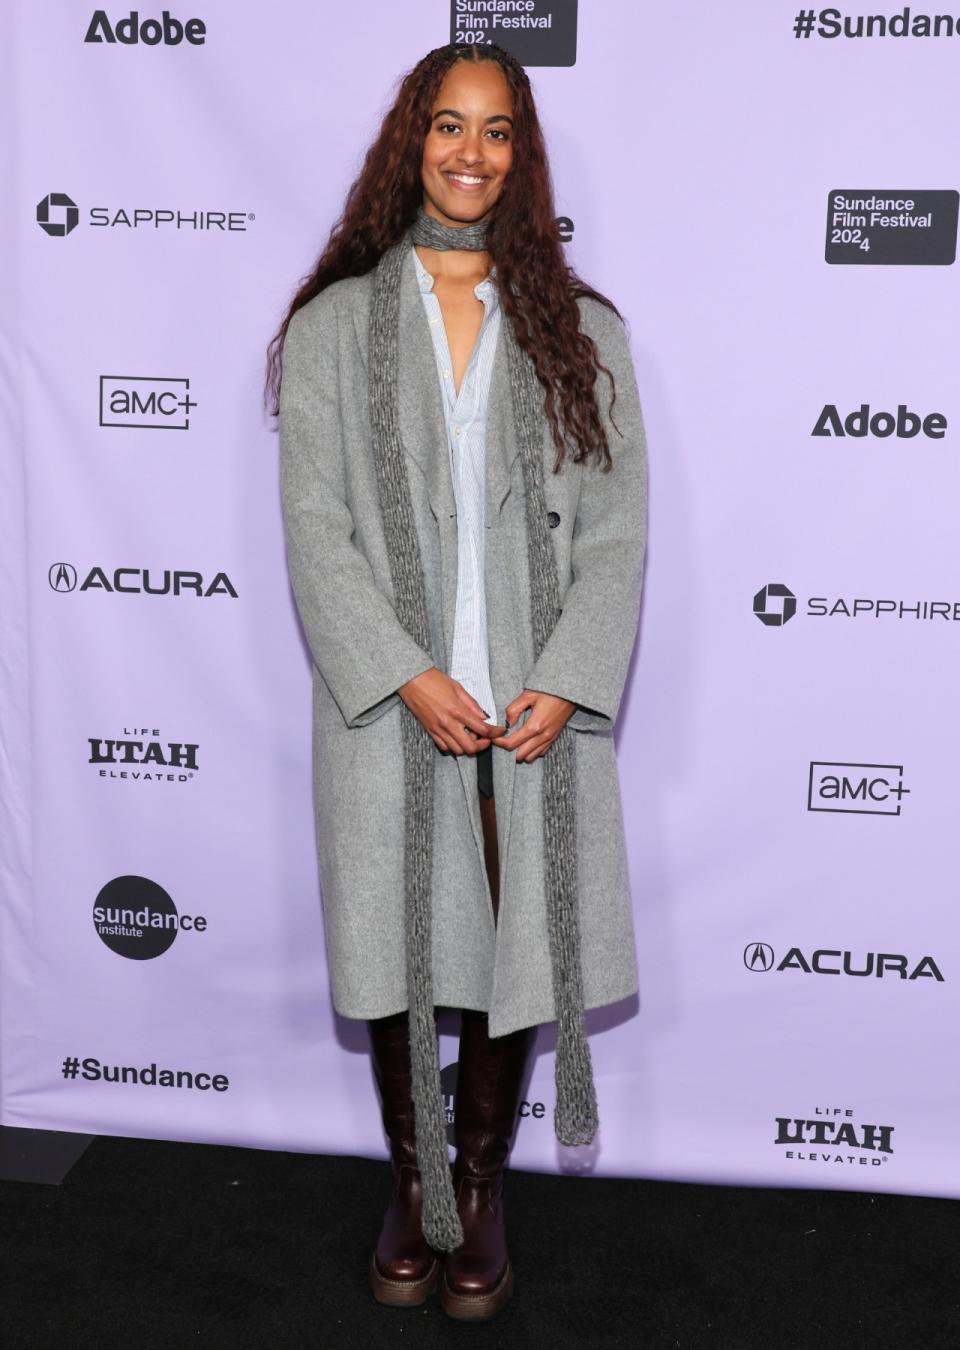 Malia Ann Obama attends the “The Heart” Premiere at the Short Film Program 1 during the 2024 Sundance Film Festival at Prospector Square Theatre on Jan. 18, 2024 in Park City, Utah [Photo by Dia Dipasupil/Getty Images].